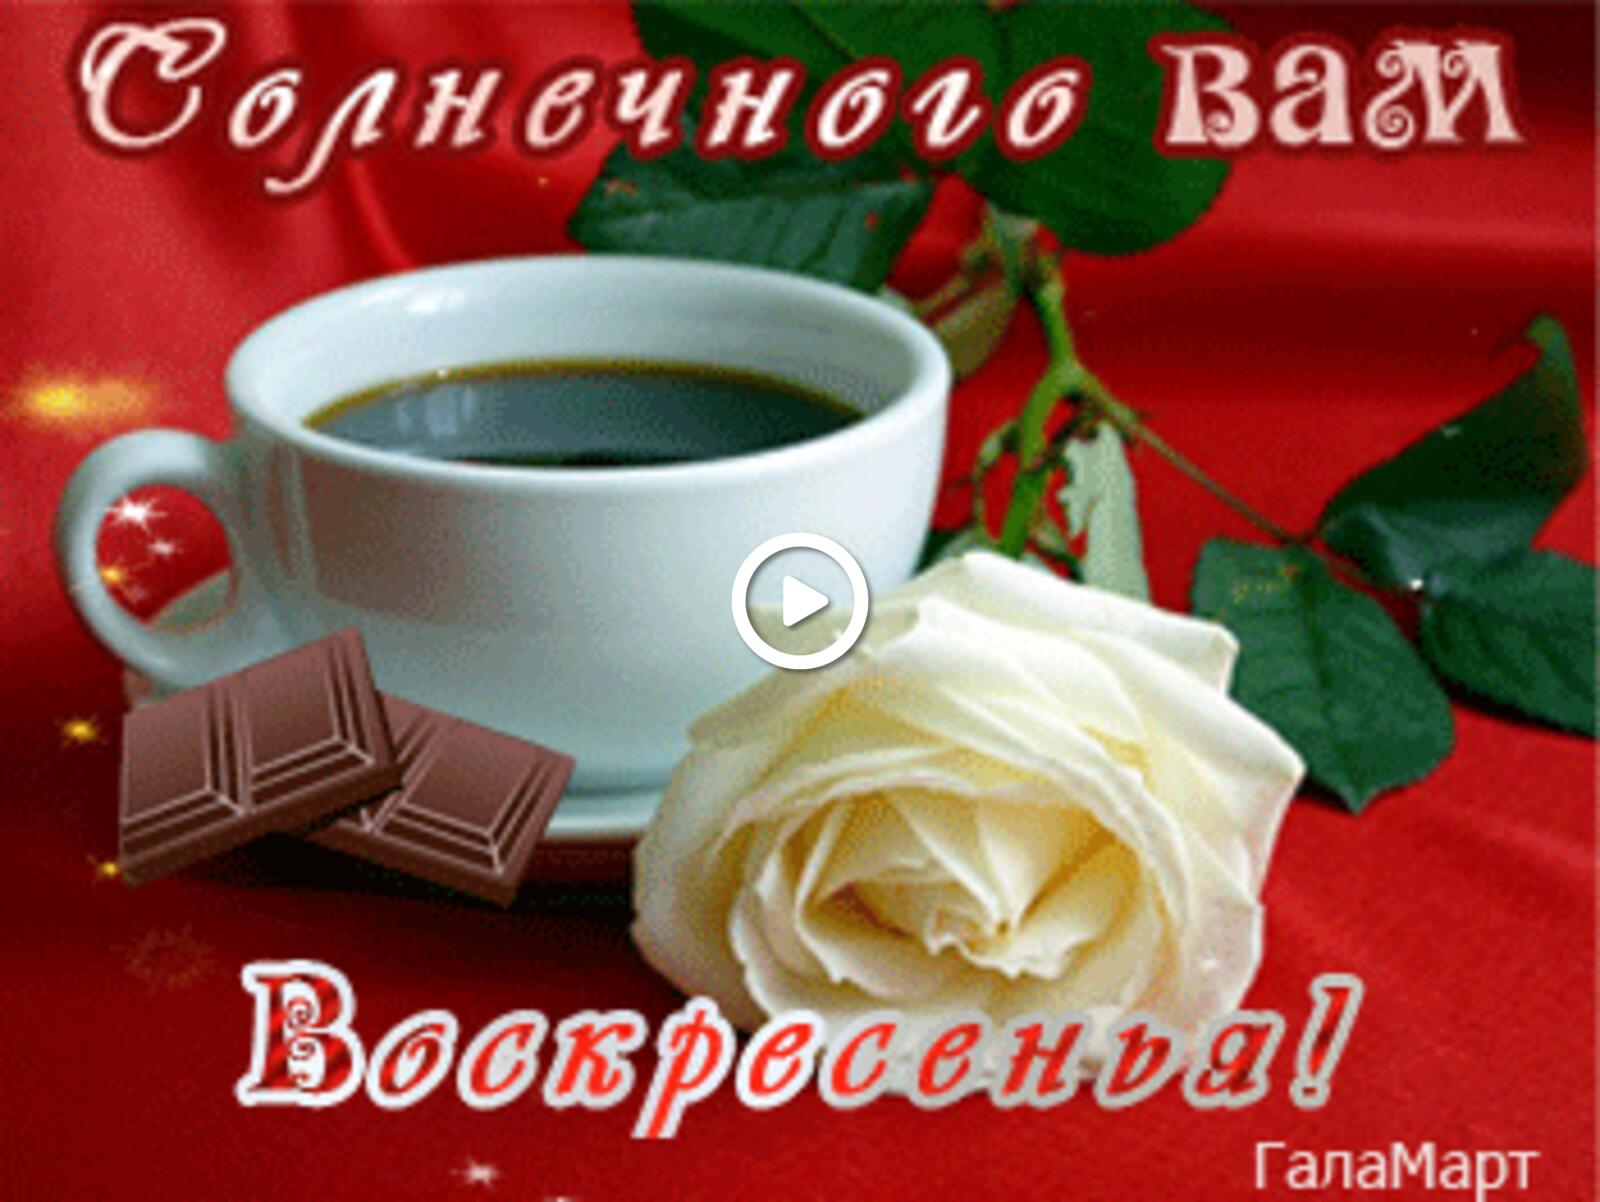 A postcard on the subject of good morning and good day cards a cup coffee for free